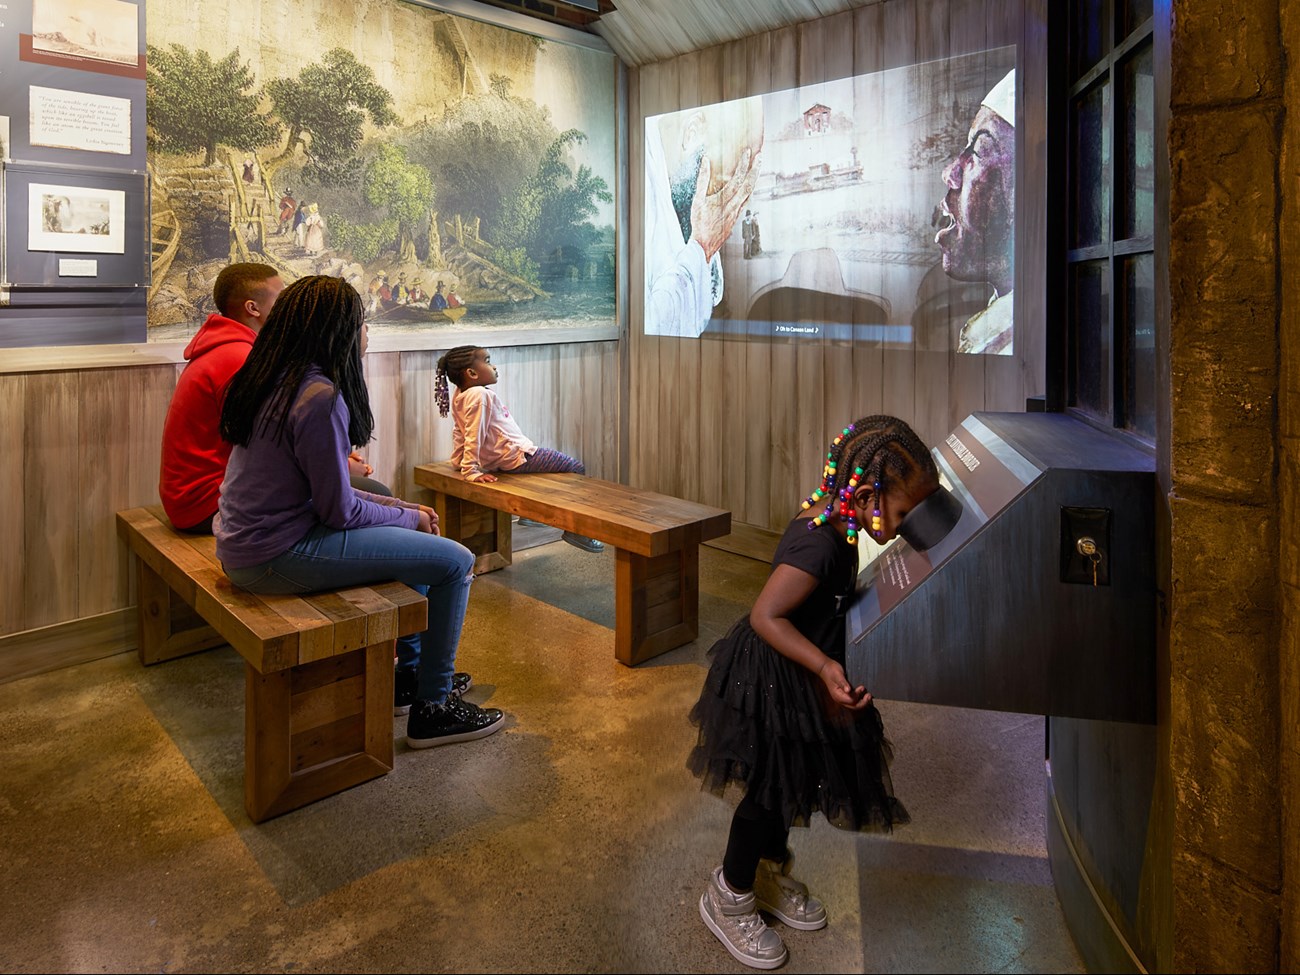 Visitors to the Niagara Falls Underground Railroad Heritage Center engage in interactive multimedia exhibits